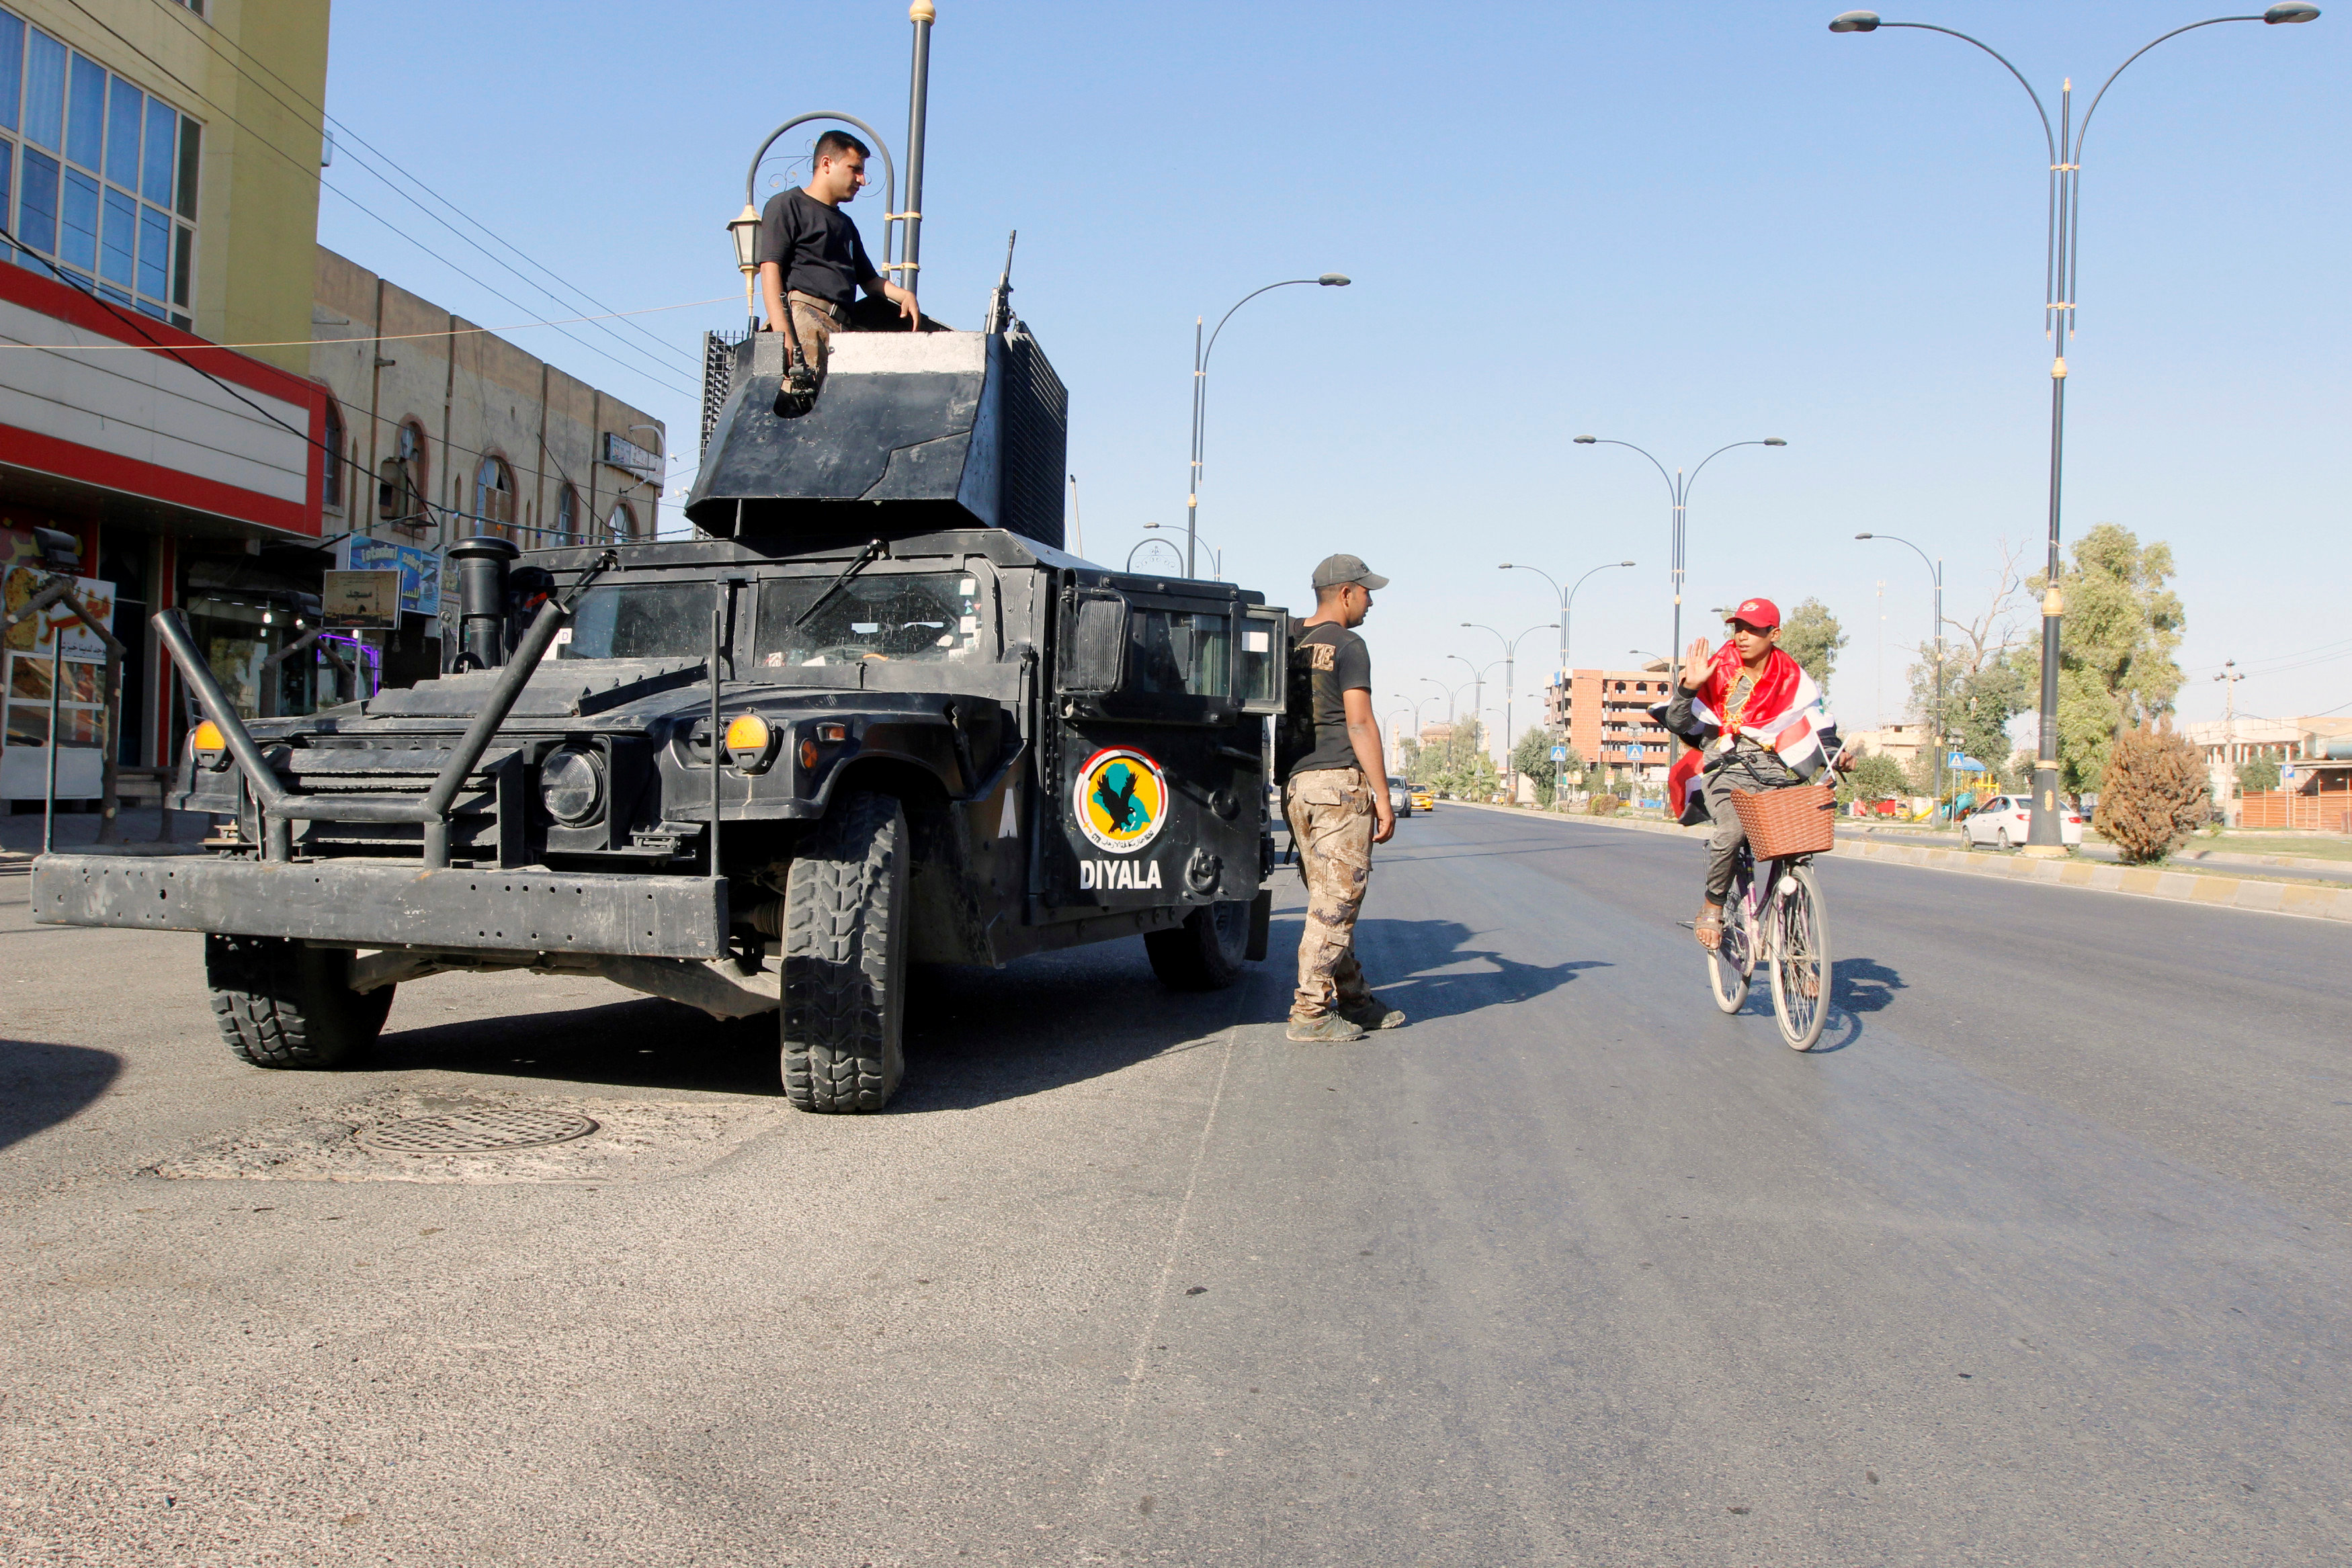 A cyclist gestures at Iraqi security forces, on a street of Kirkuk, Iraq October 19, 2017. REUTERS/Ako Rasheed